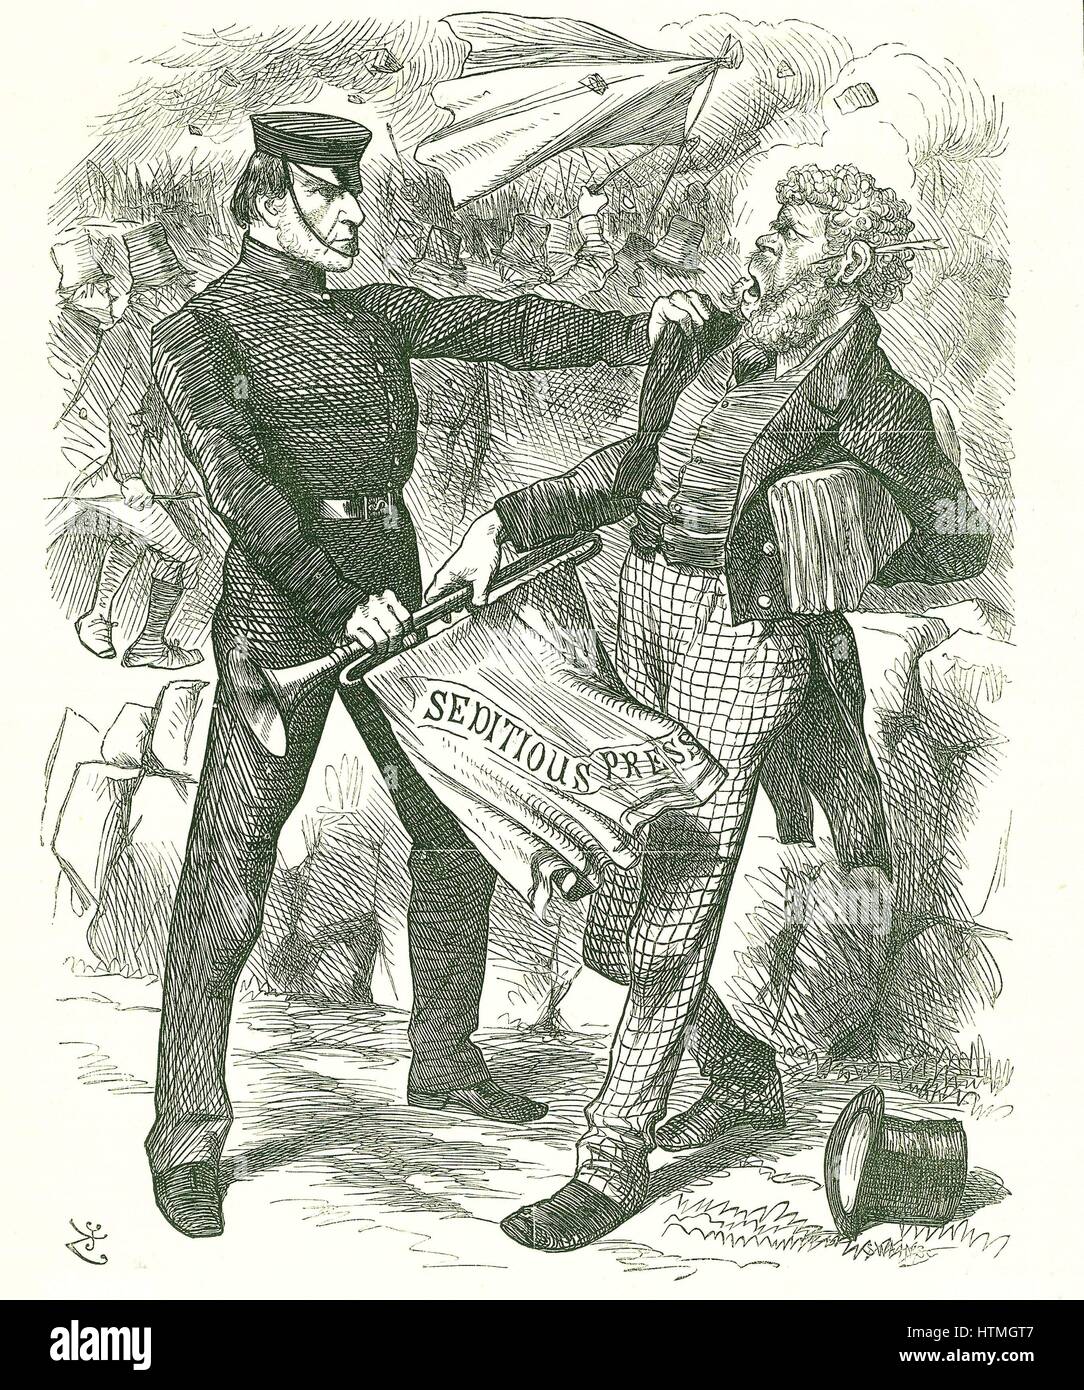 'Silencing the Trumpet. (after Aesop)': Prime Minister Gladstone silencing the Irish press for inciting Fenian violence. John Tenniel cartoon from 'Punch', London, 9 April 1870. Stock Photo